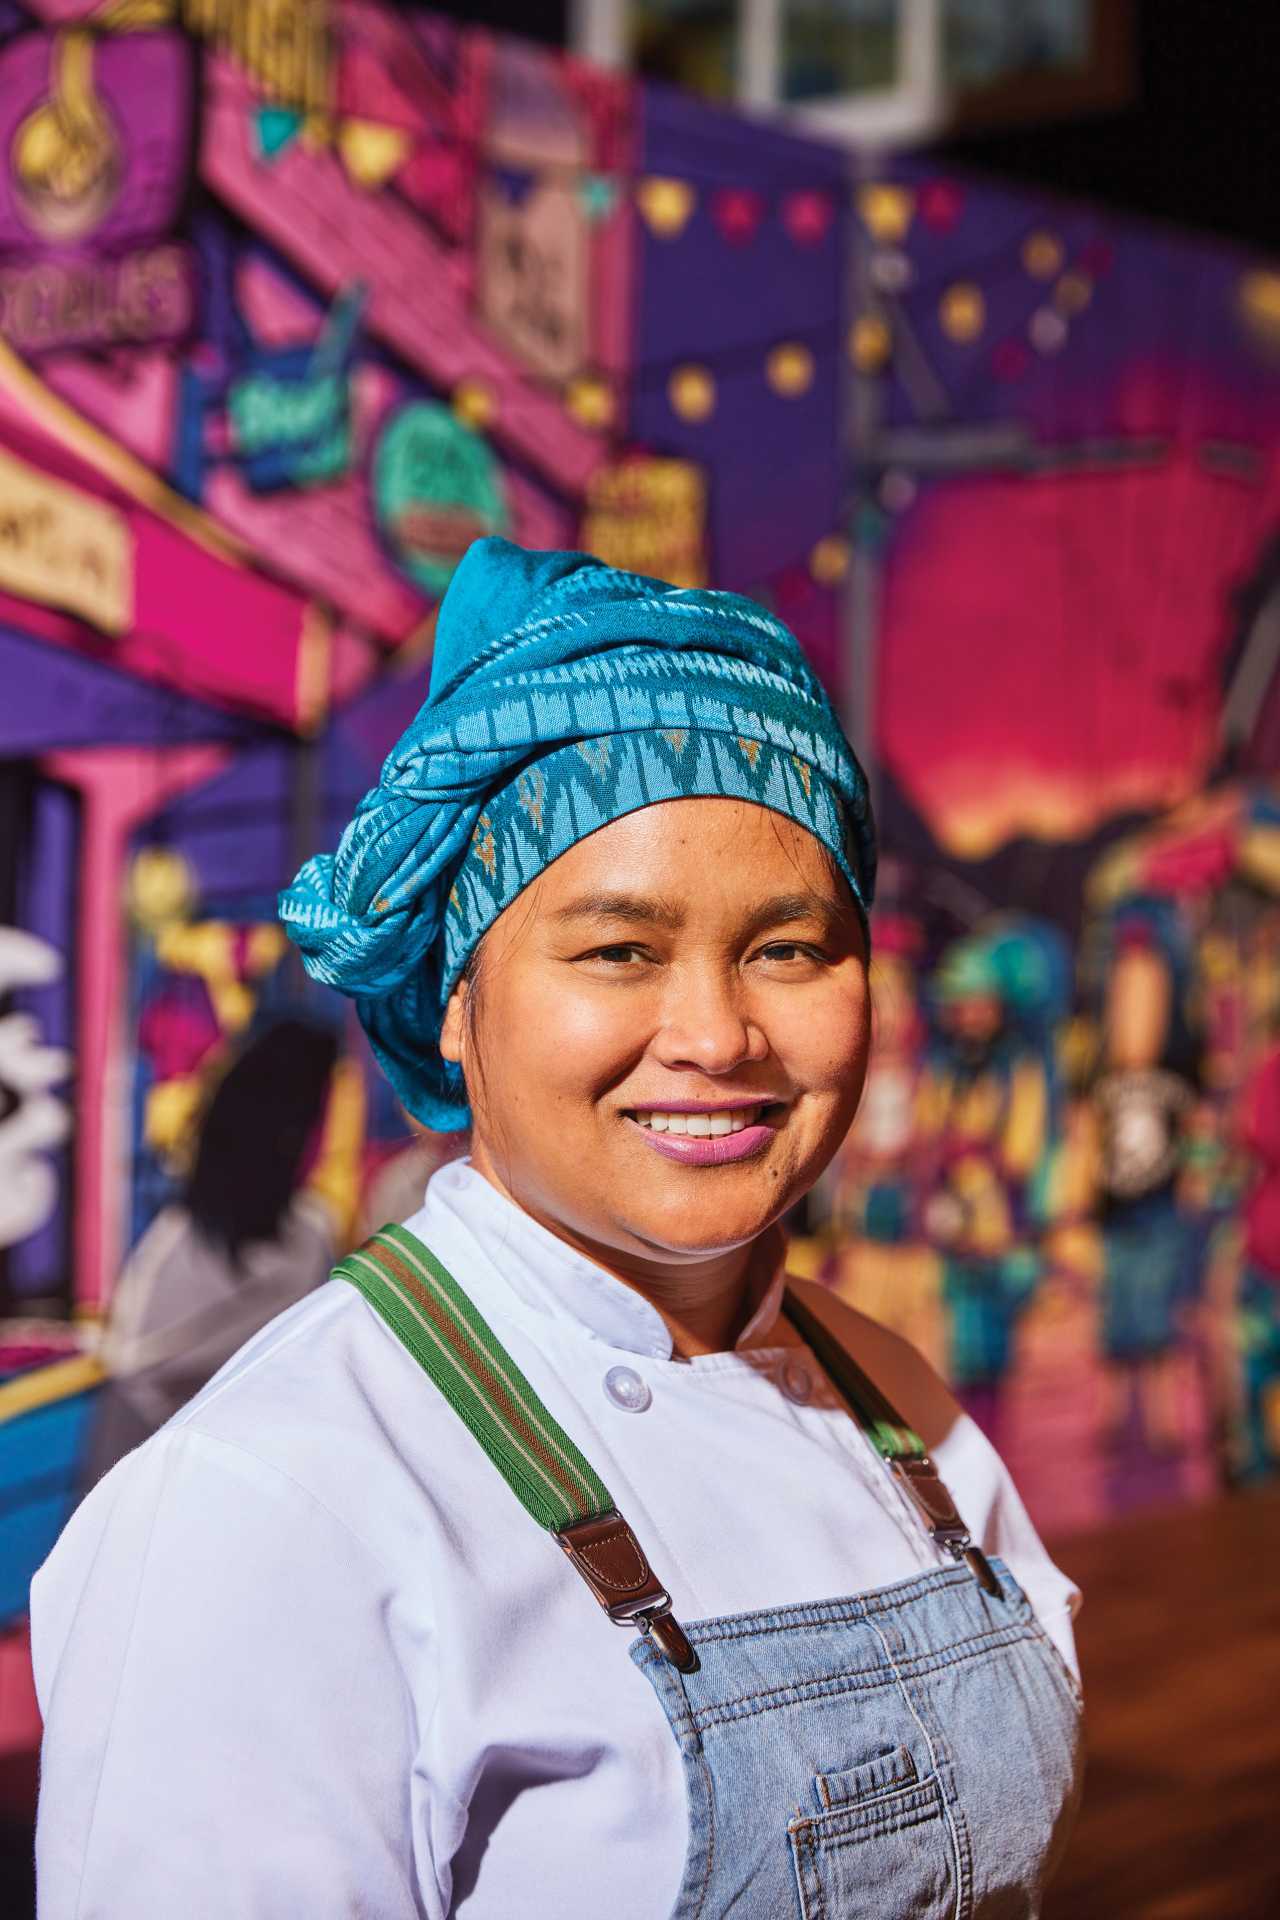 PAI executive chef and co-owner Nuit Regular